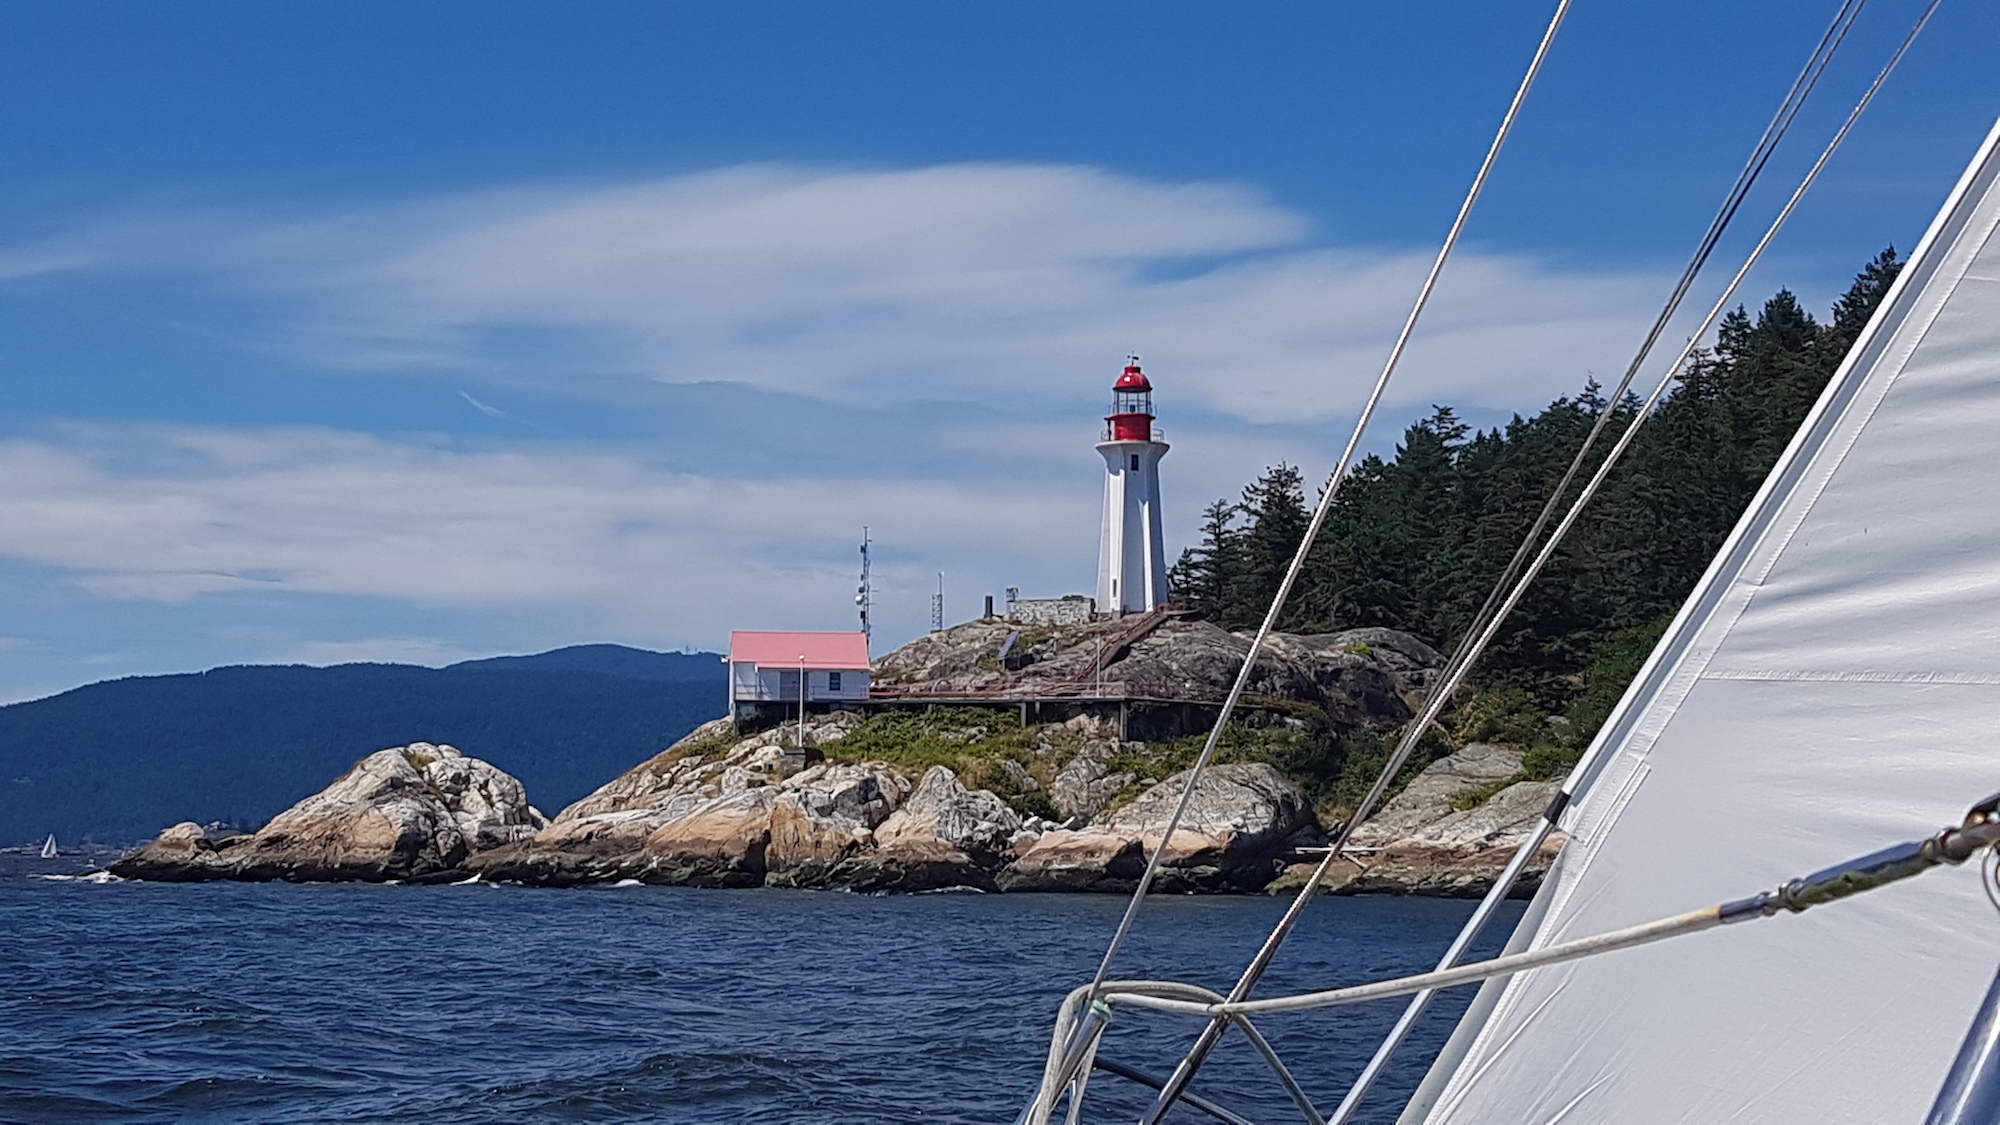 Historic Point Atkinson Lighthouse with a peek of the sheet on Kia Aura sailing past on a summer day